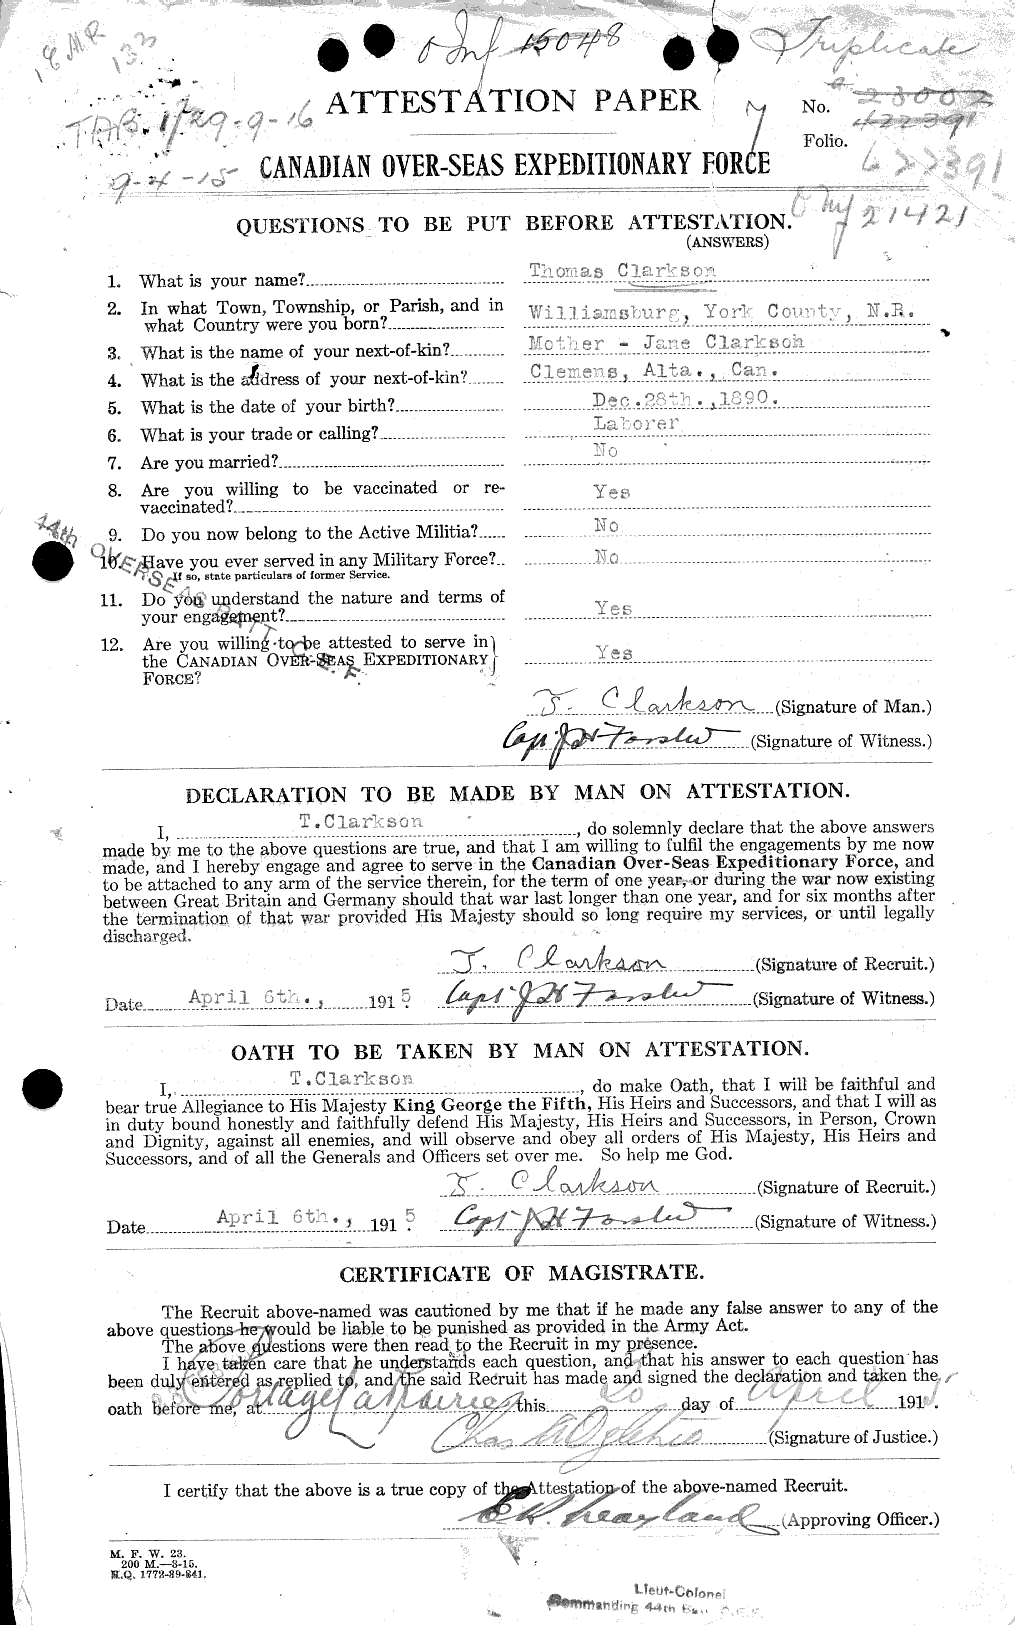 Personnel Records of the First World War - CEF 019014a